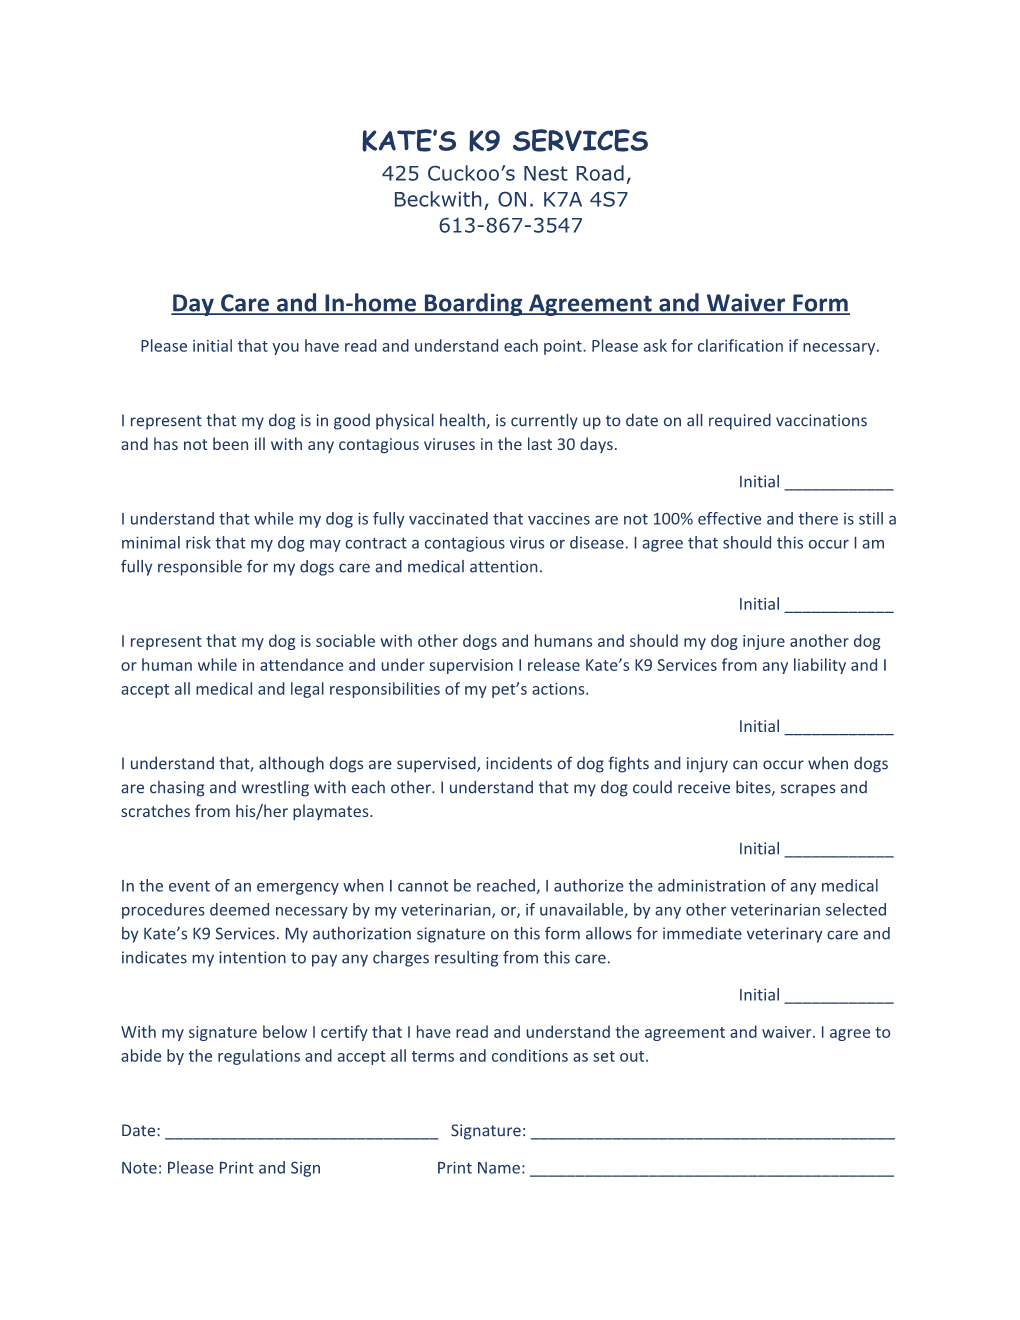 Day Care and In-Home Boarding Agreement and Waiver Form